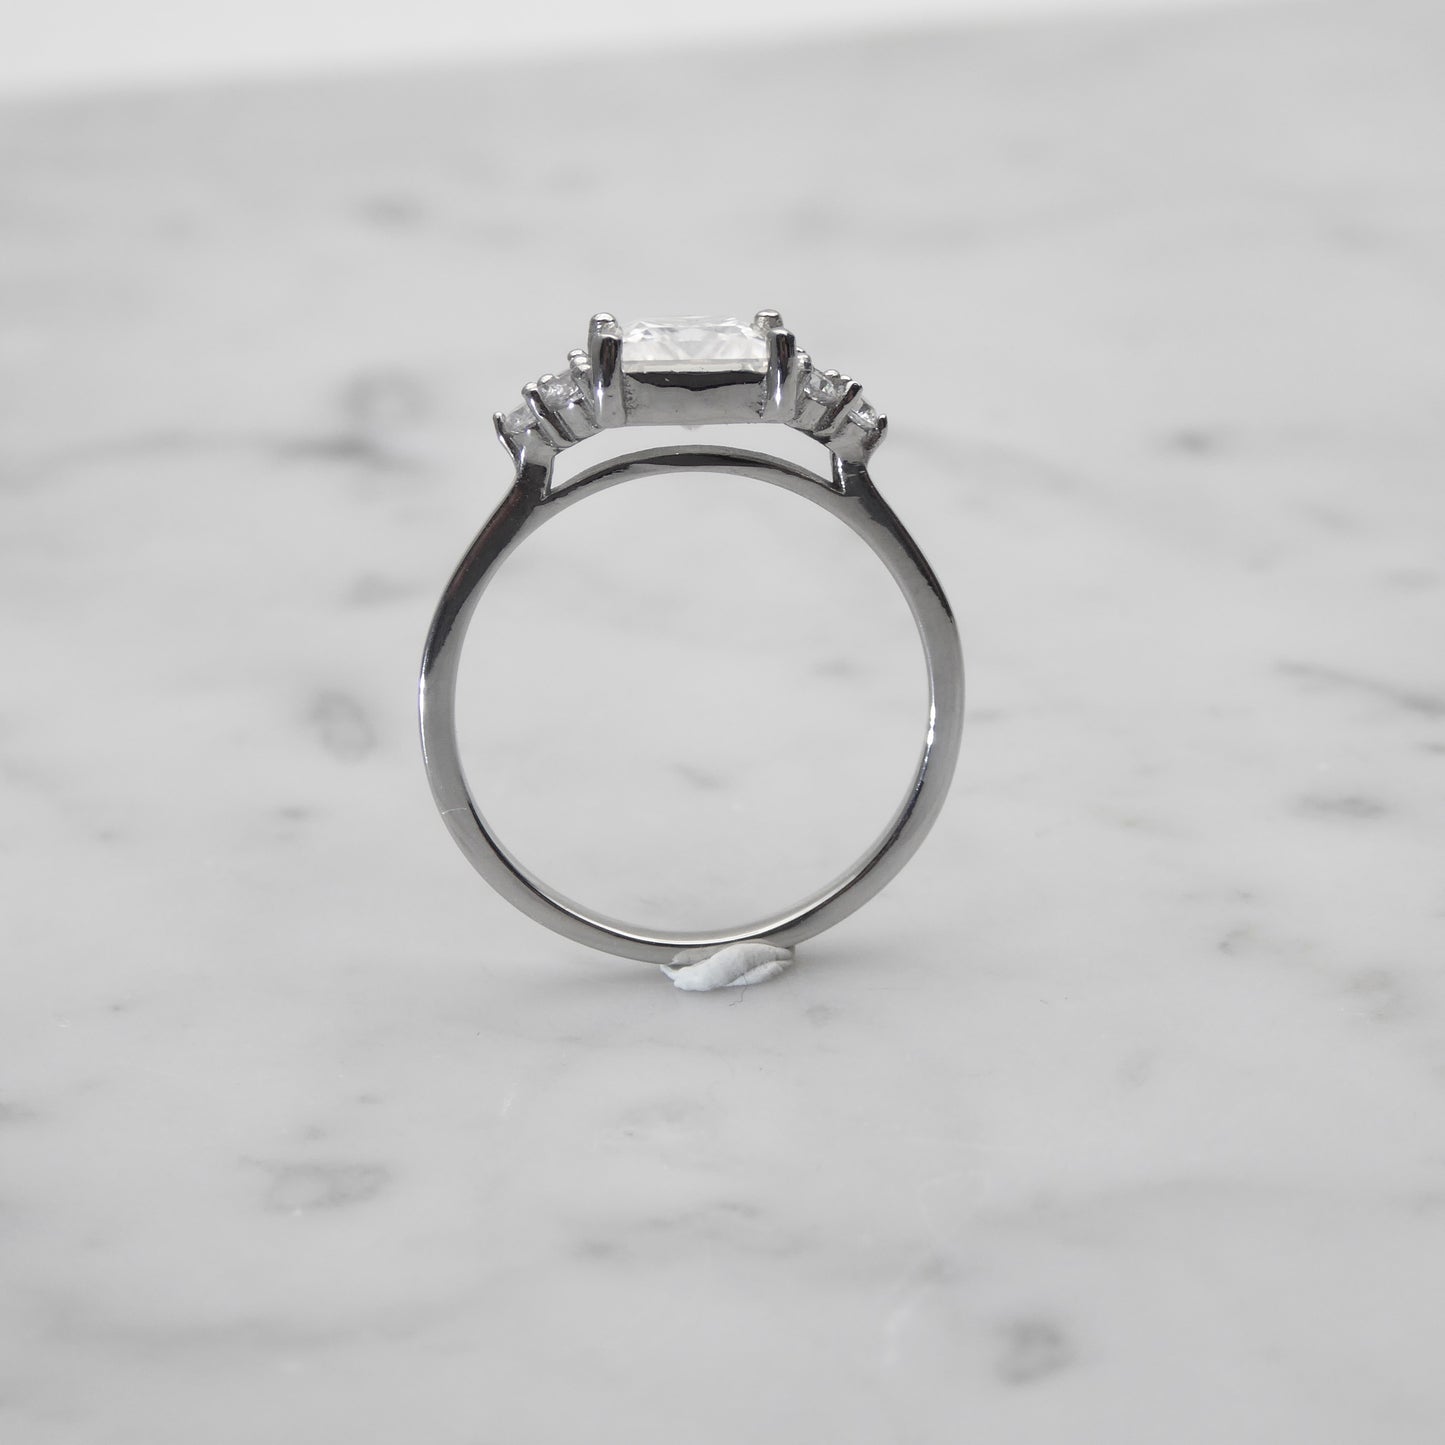 Princess Cut Man Made Diamond Simulant ring available in white gold filled or Titanium - engagement ring - wedding ring